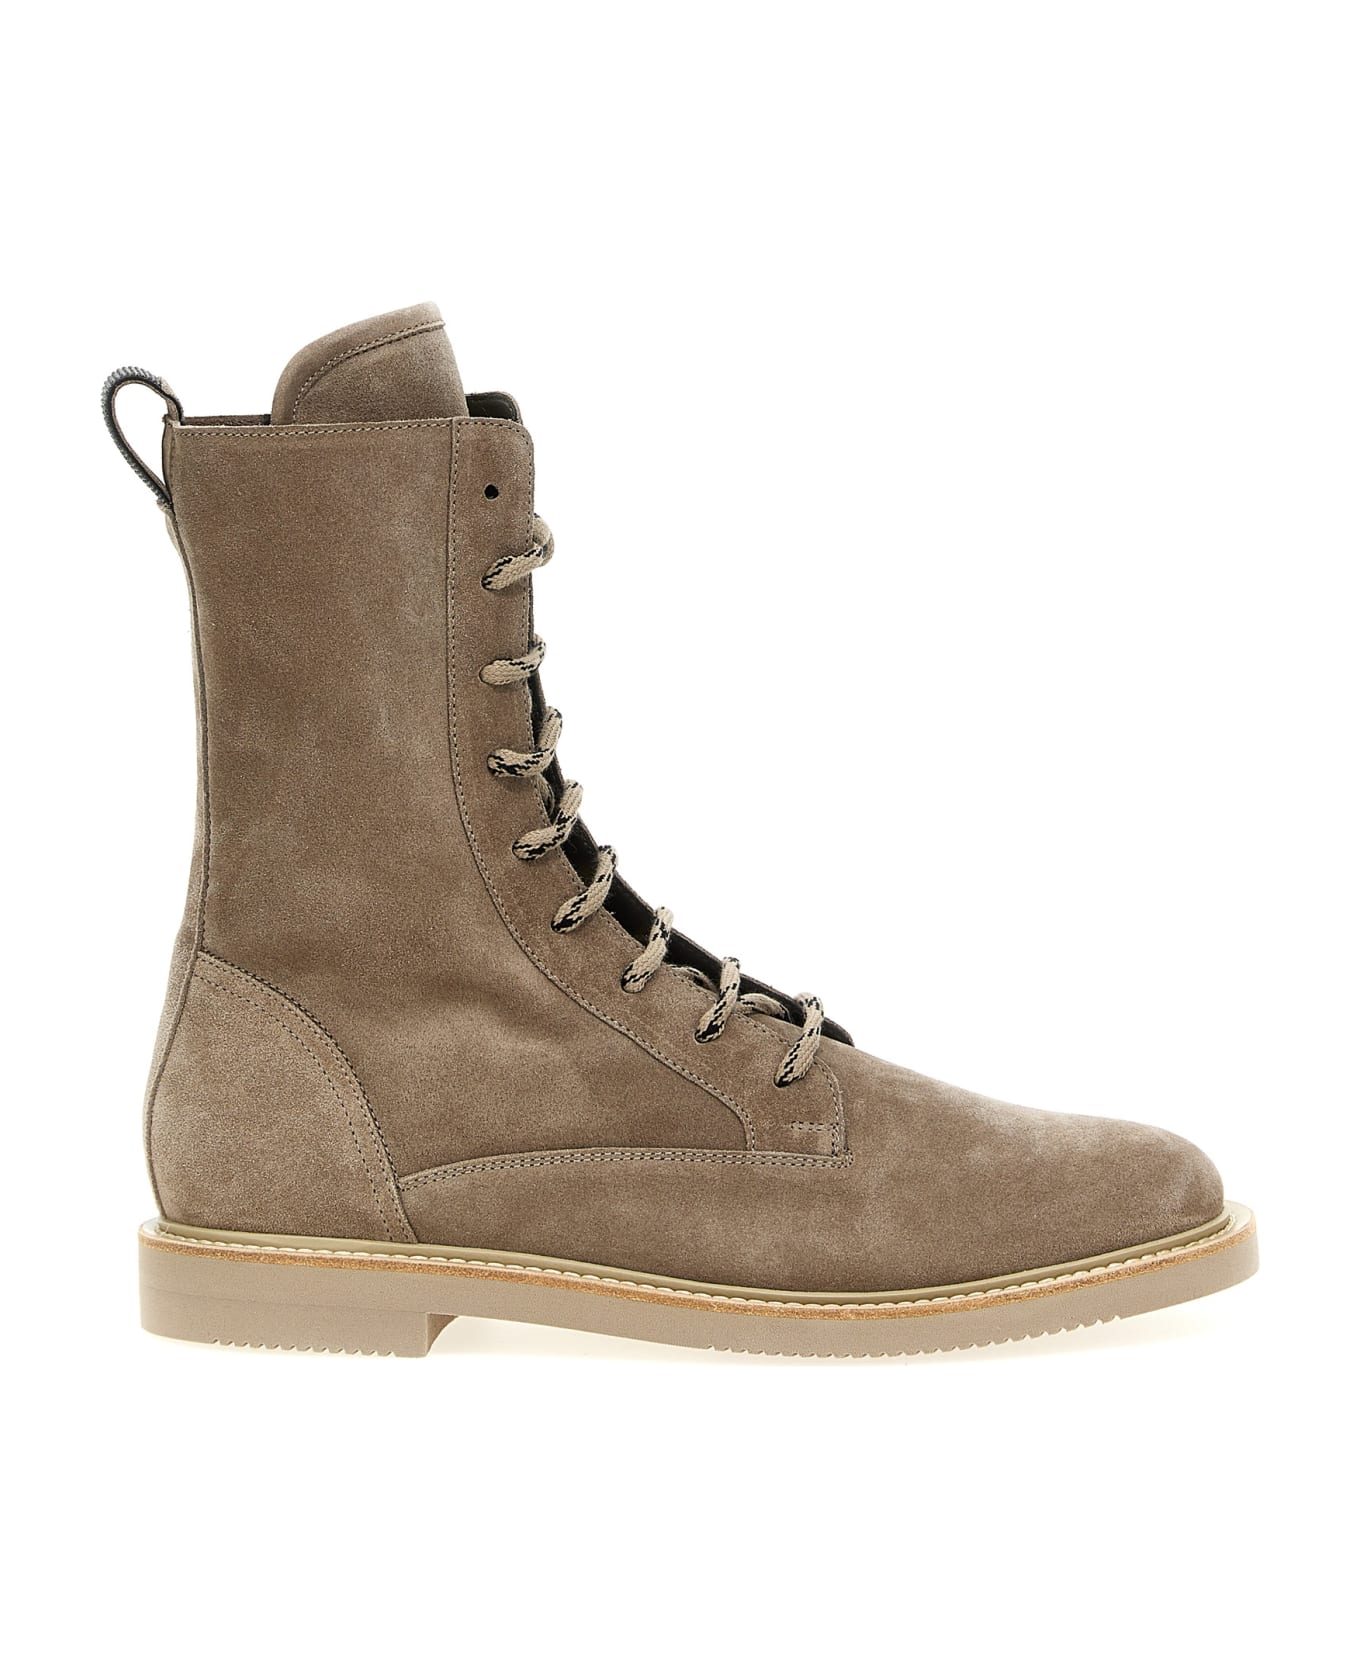 Brunello Cucinelli Suede Lace-up Boots - Beige